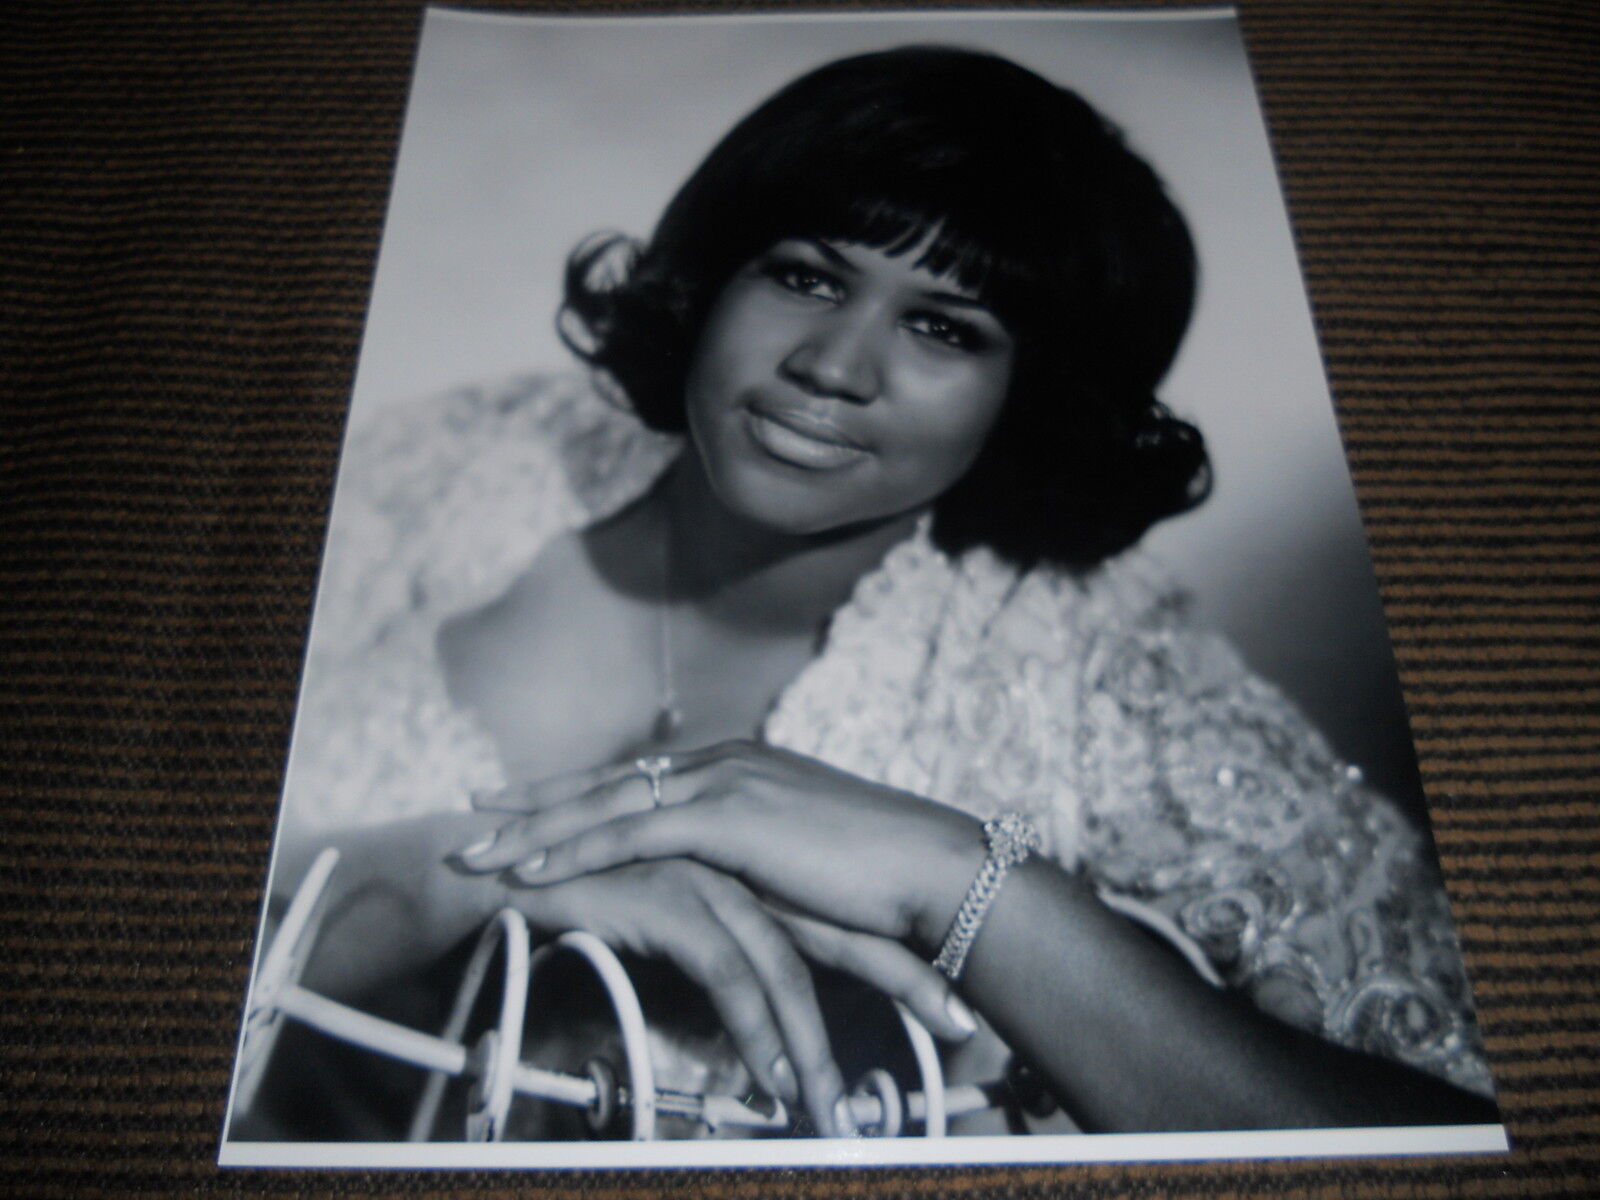 Aretha Franklin Sexy Vintage B&W Soul Music 11x14 Promo Photo Poster painting #1